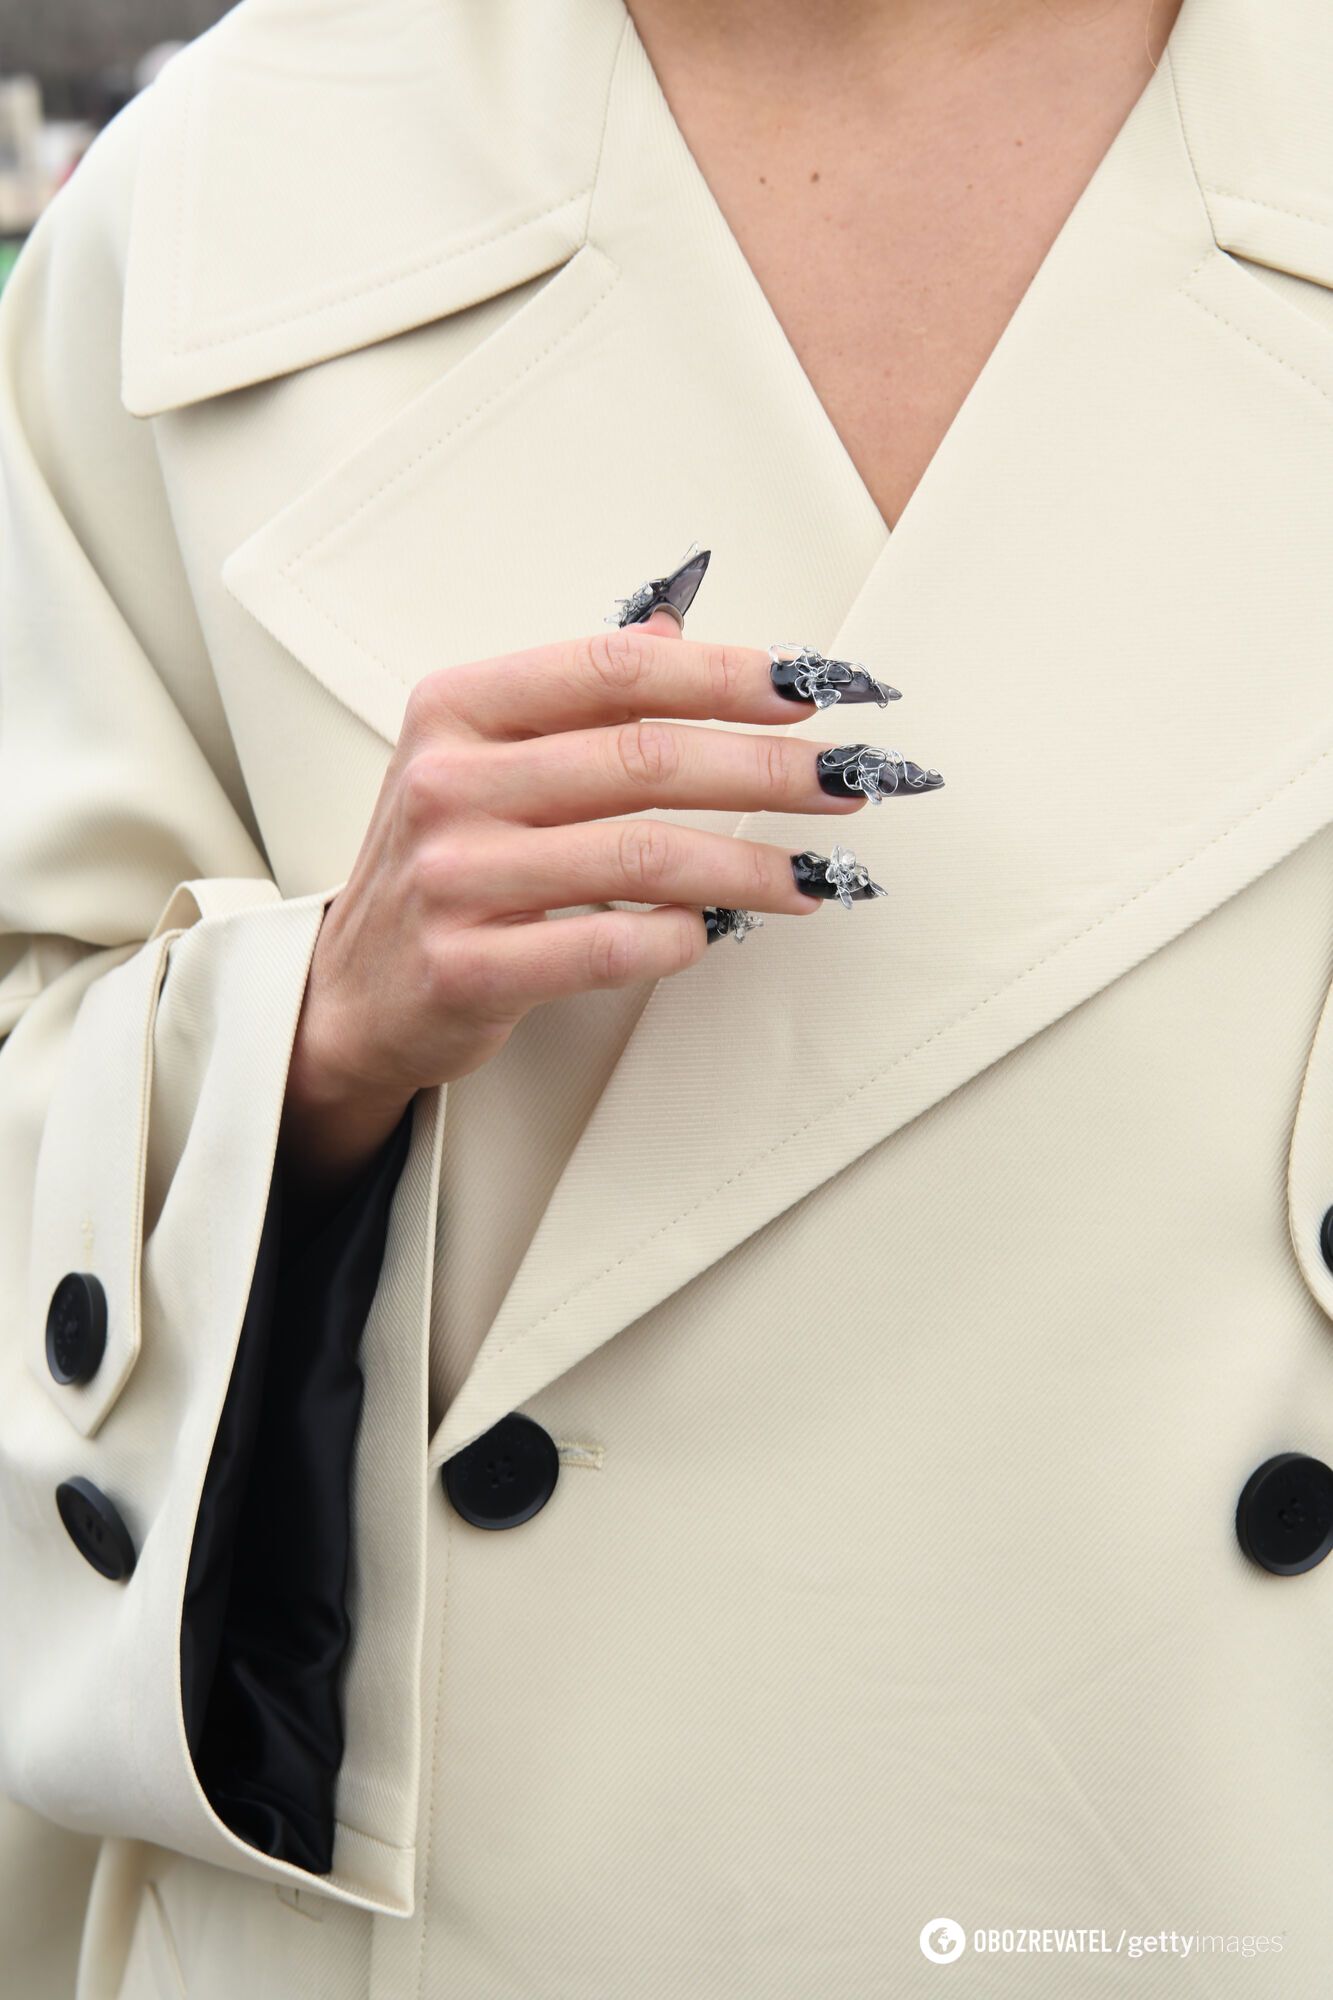 Manicure trends that will dominate this spring and summer. 10 ideas for inspiration from minimalism to luxurious classics